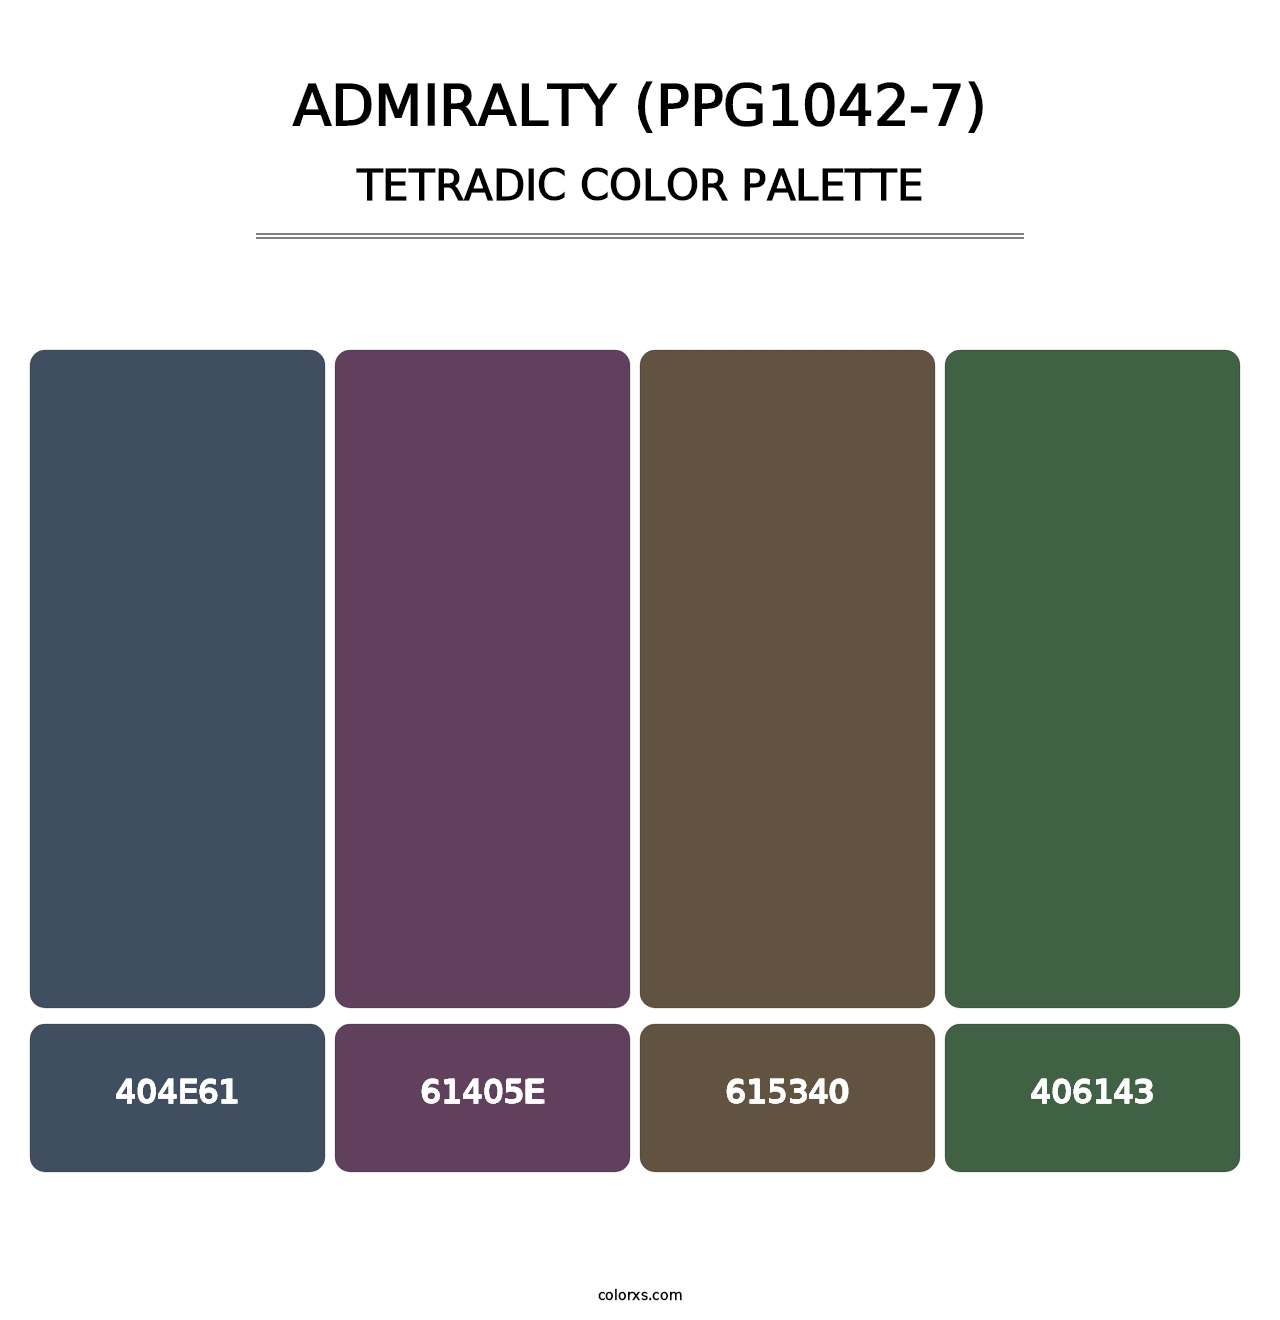 Admiralty (PPG1042-7) - Tetradic Color Palette